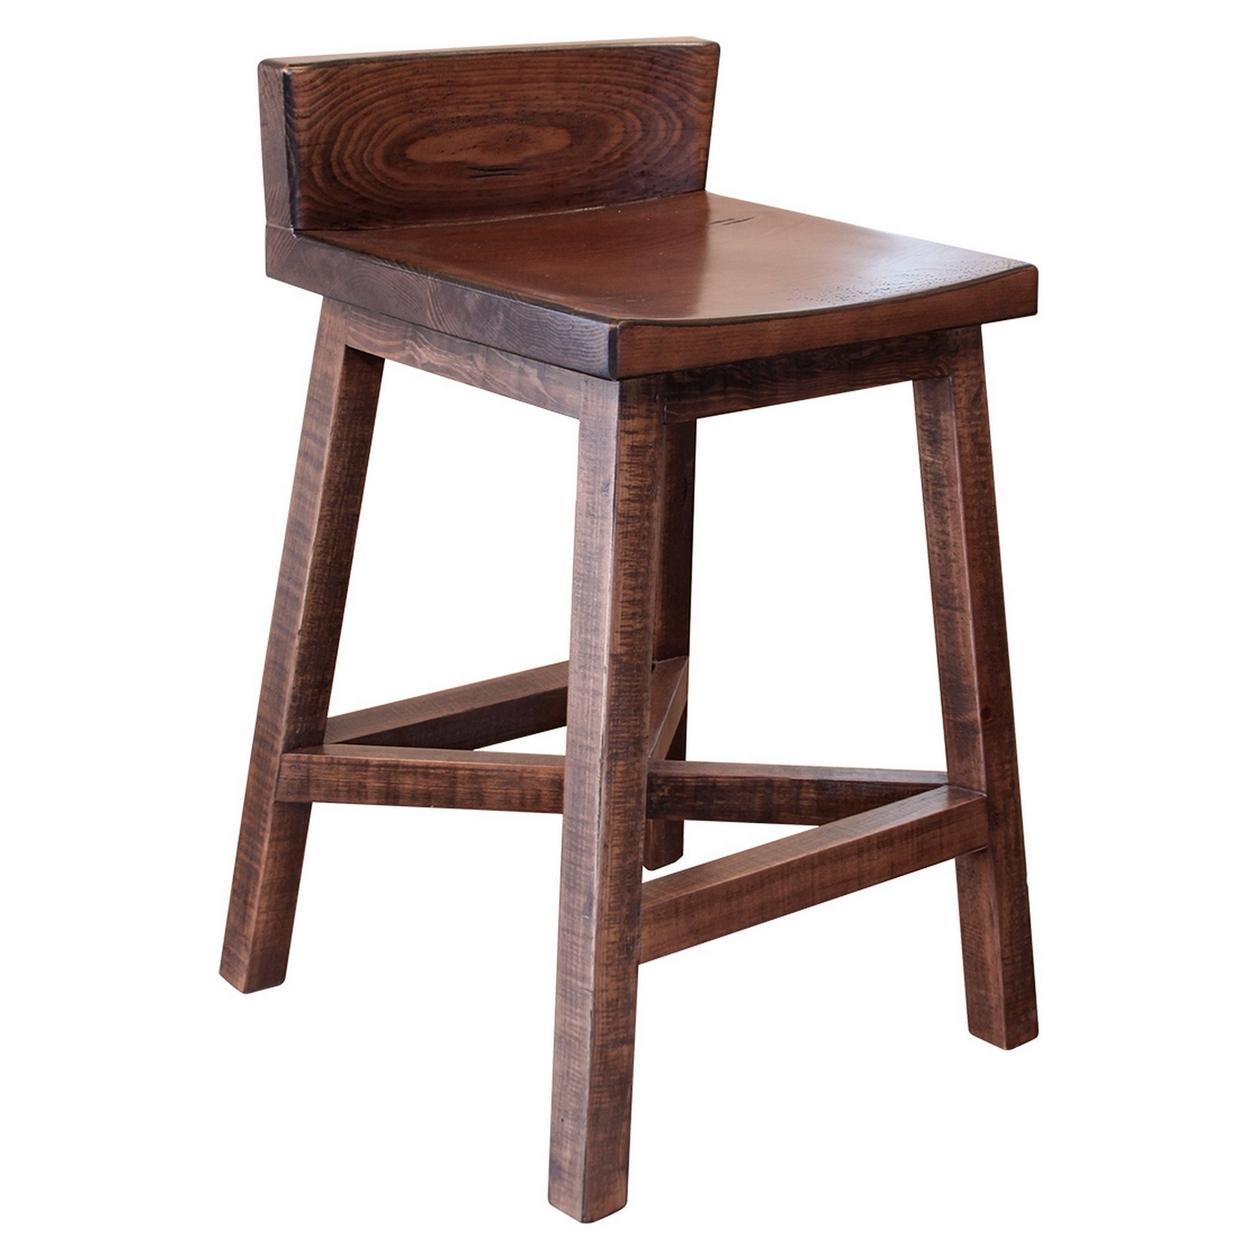 Ata 24 Inch Counter Height Stool, Lacquer Finish, Solid Pine Wood, Brown- Saltoro Sherpi